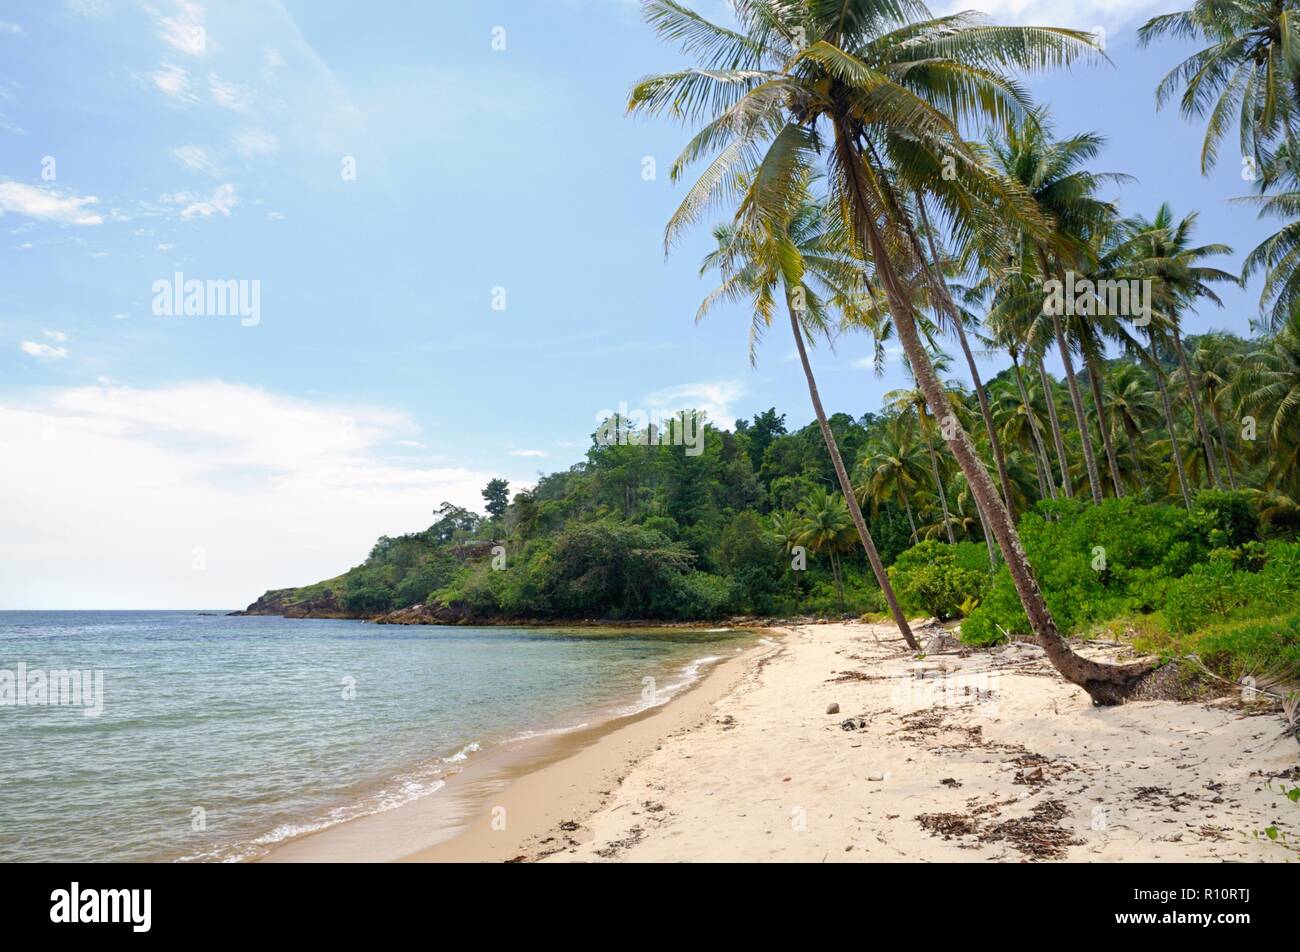 Tropical landscape with deserted amber sand beach, coconut palm trees and turquoise tropical sea on Koh Chang Island in Thailand Stock Photo